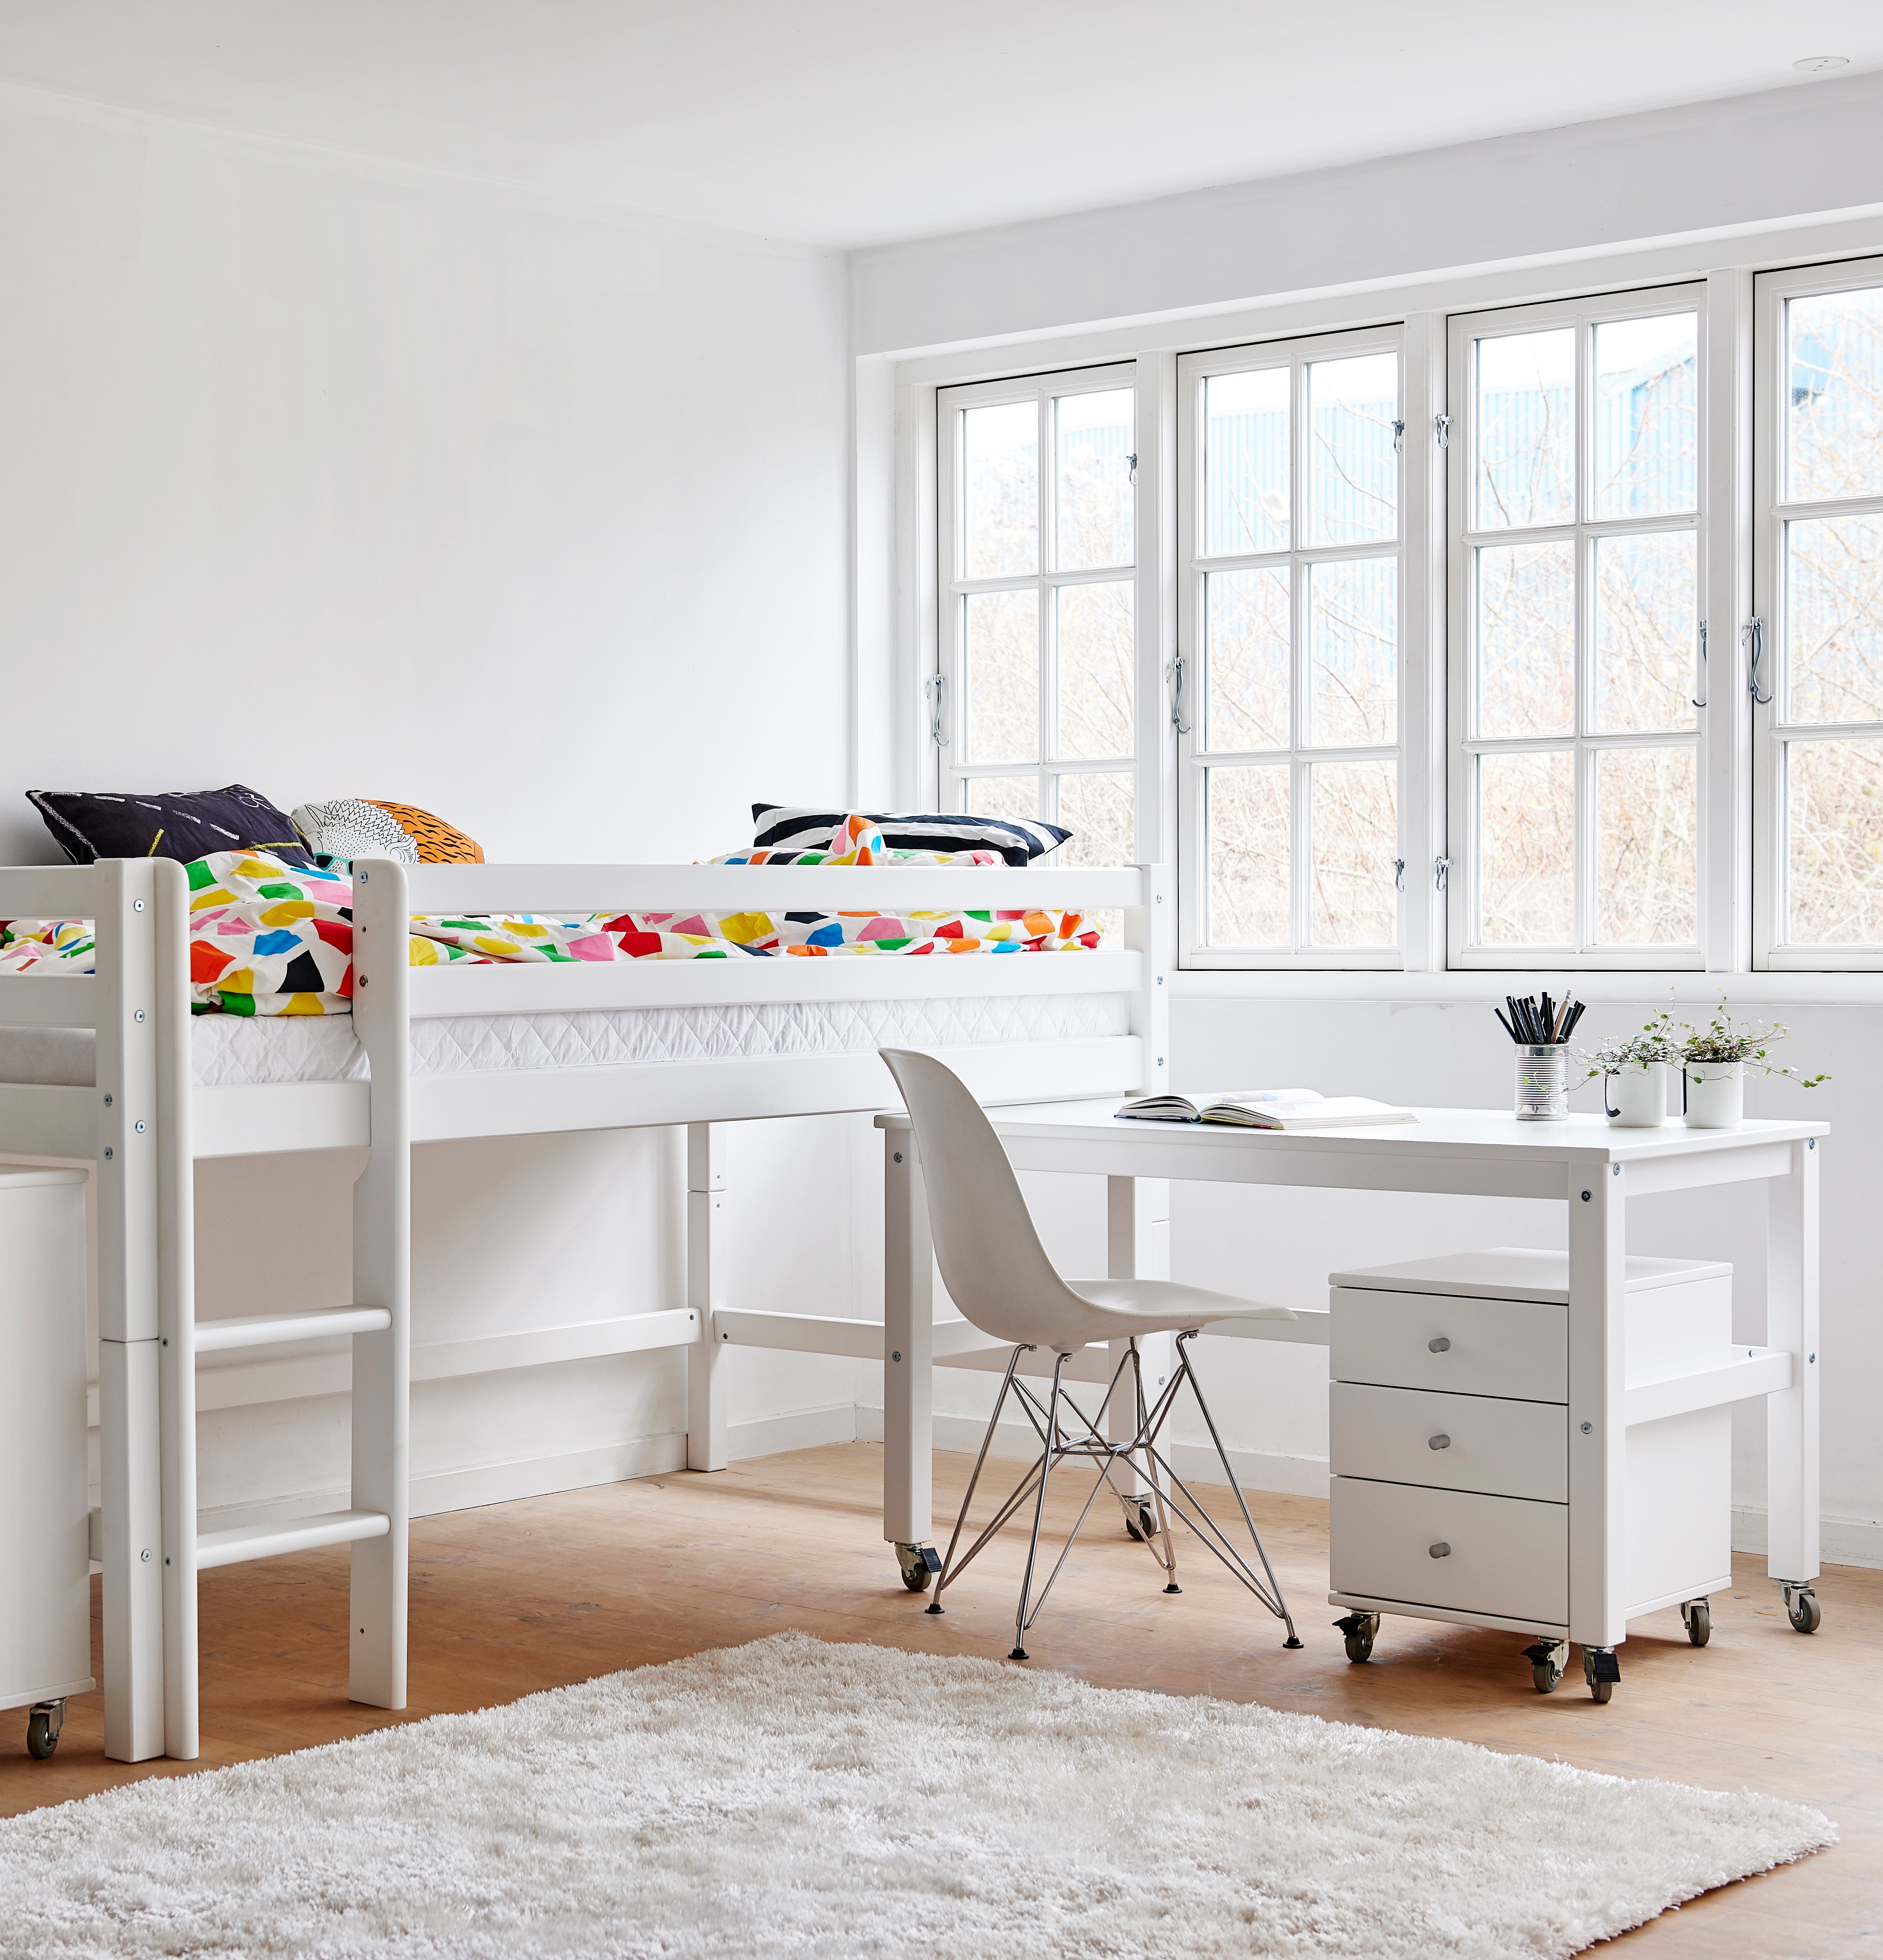 ECO Dream mid sleeper bed with desk